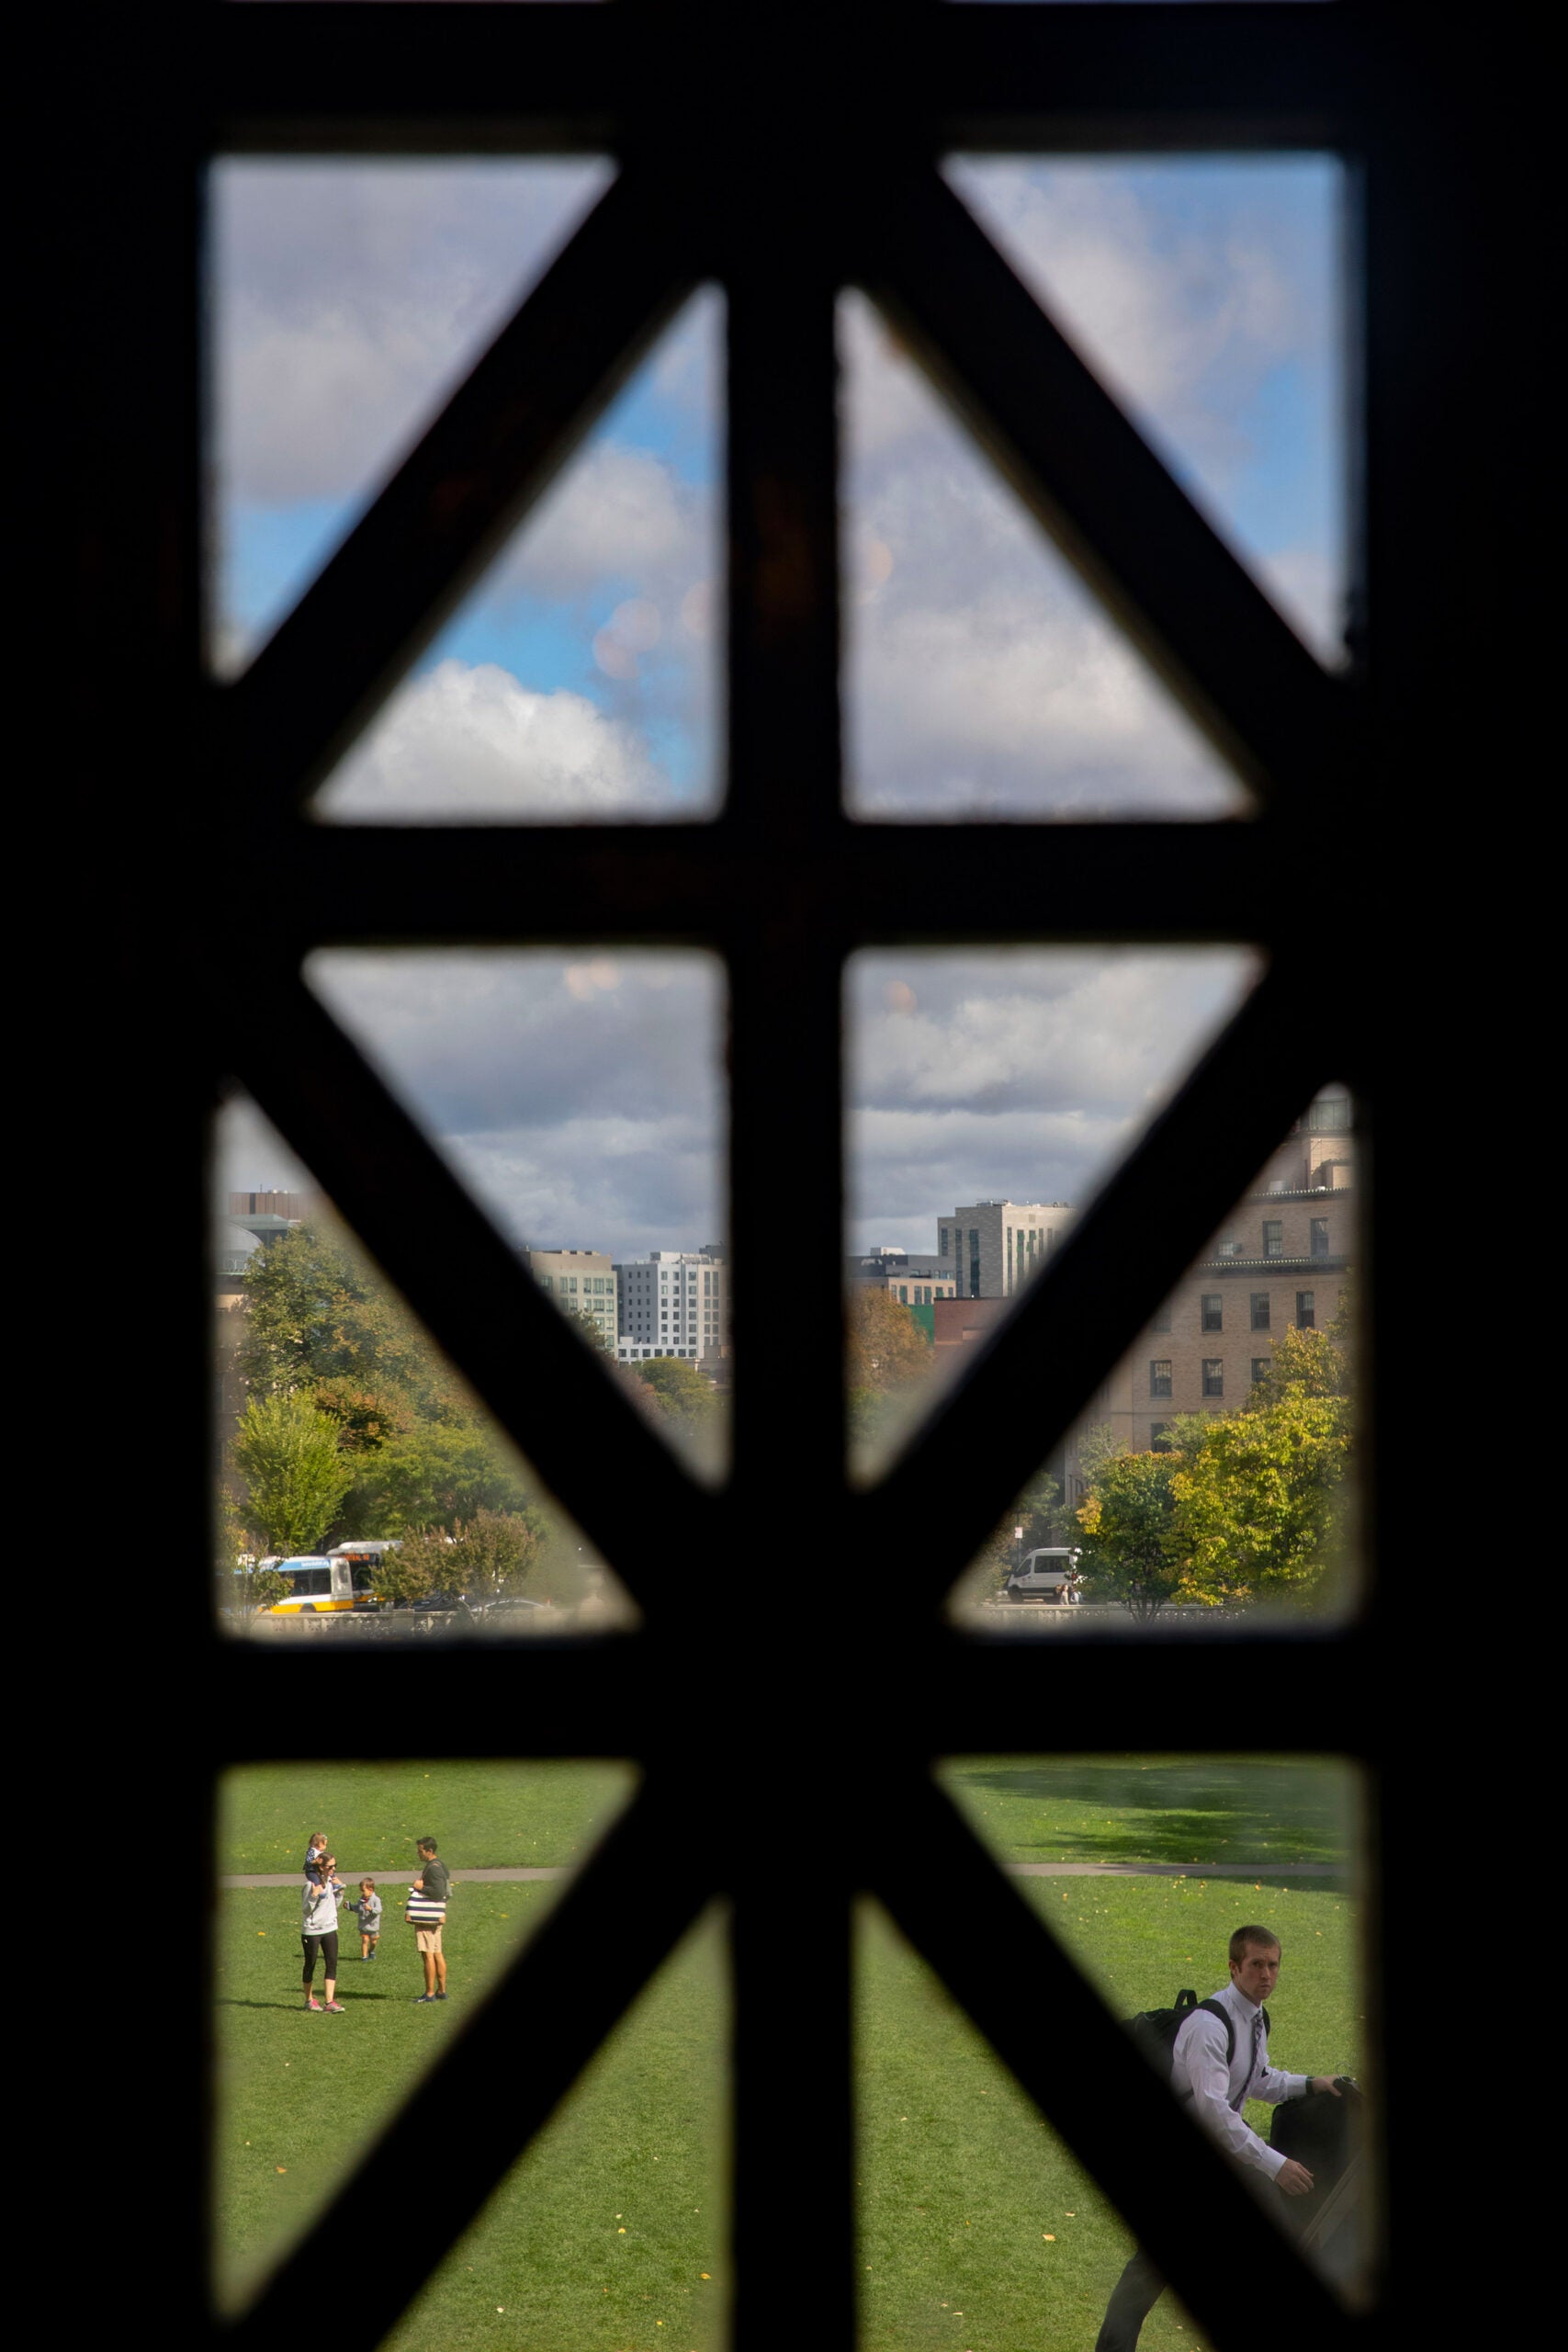 A dark window frames a family in the courtyard at Harvard Medical School.